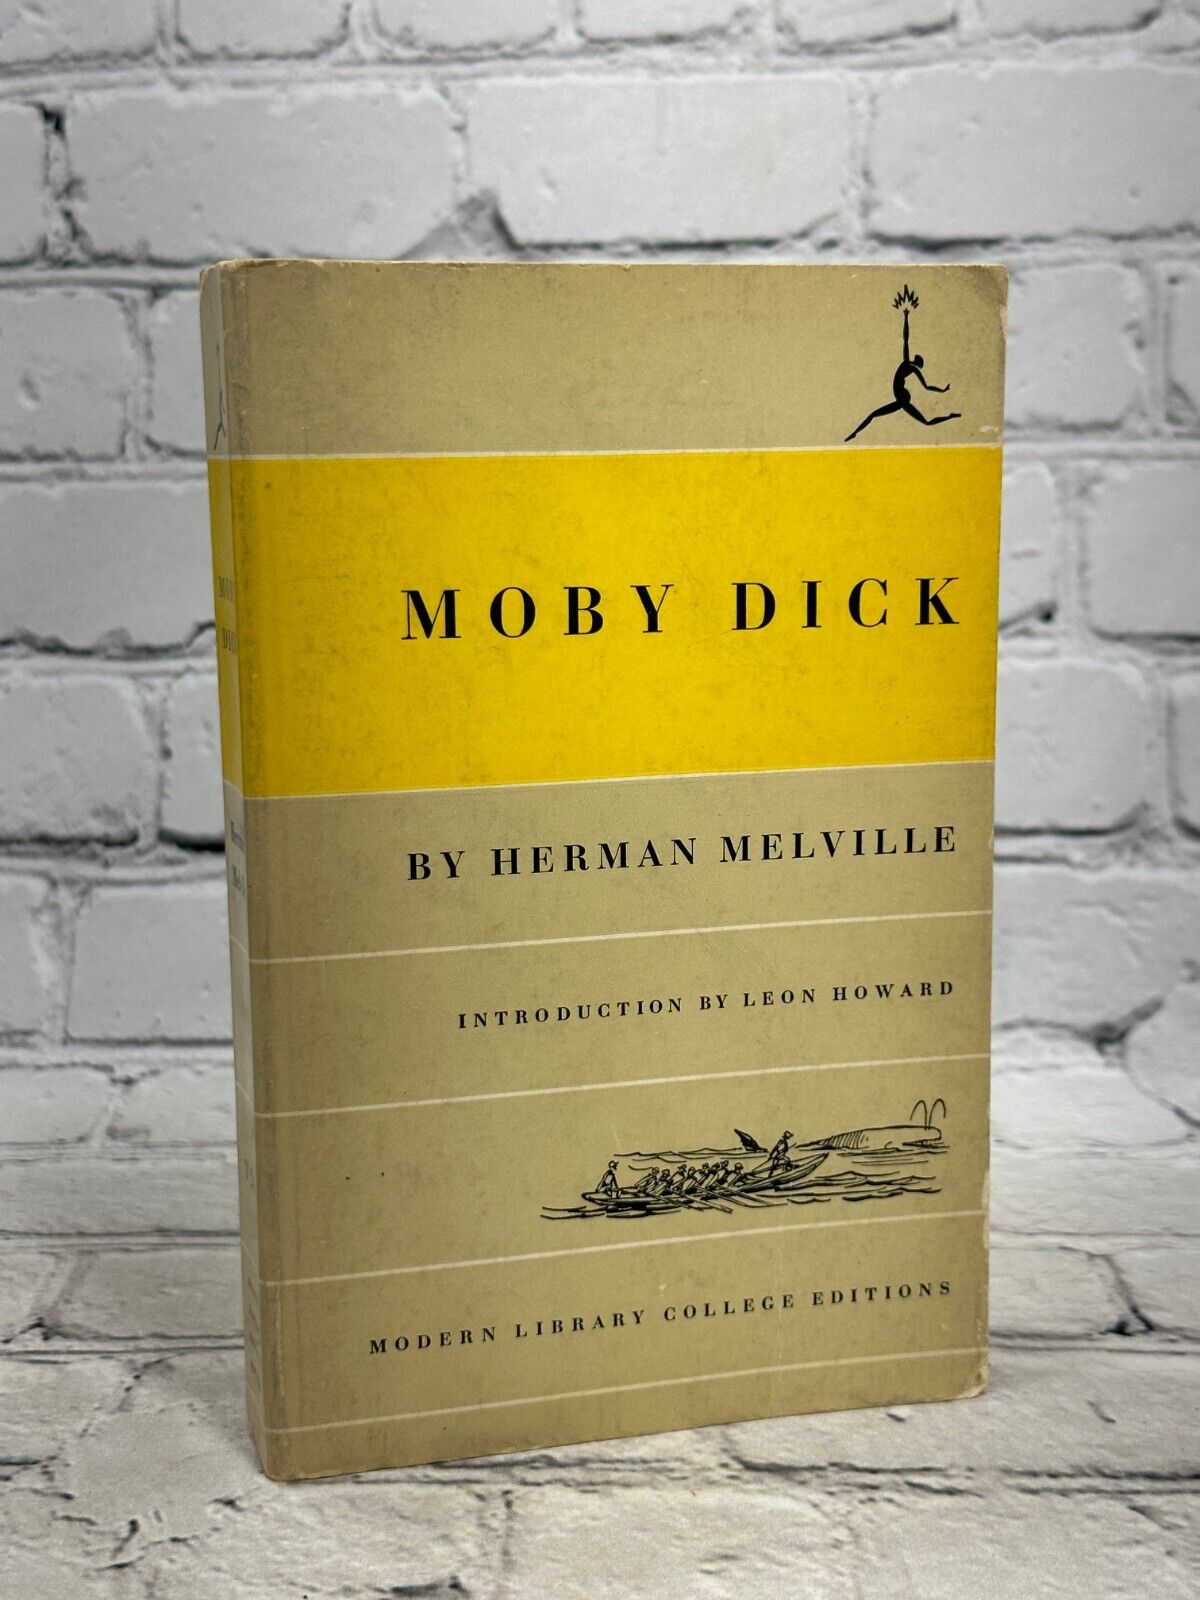 Moby Dick by Herman Melville [1950 · Modern Library]